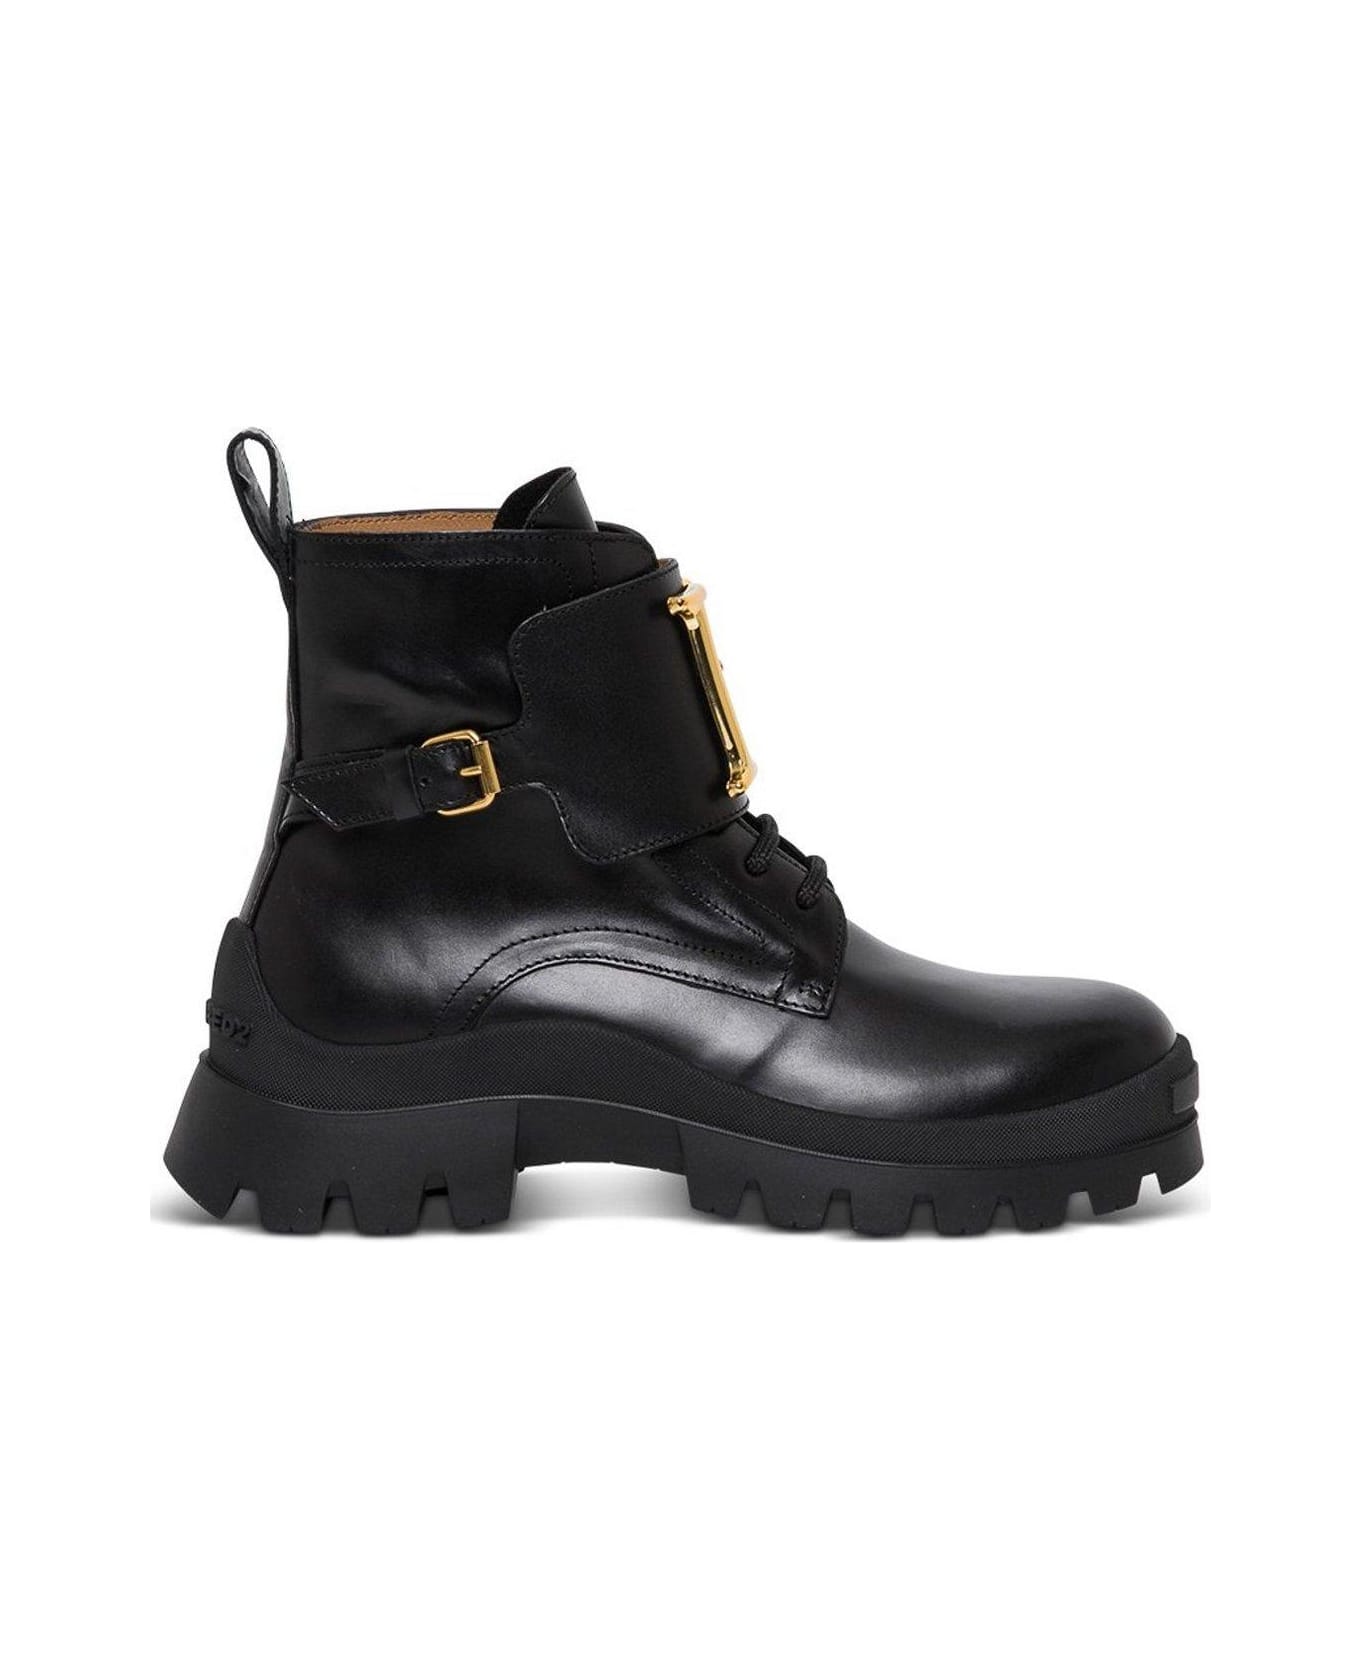 Dsquared2 D2 Statement Lace-up Boots - Nero ブーツ